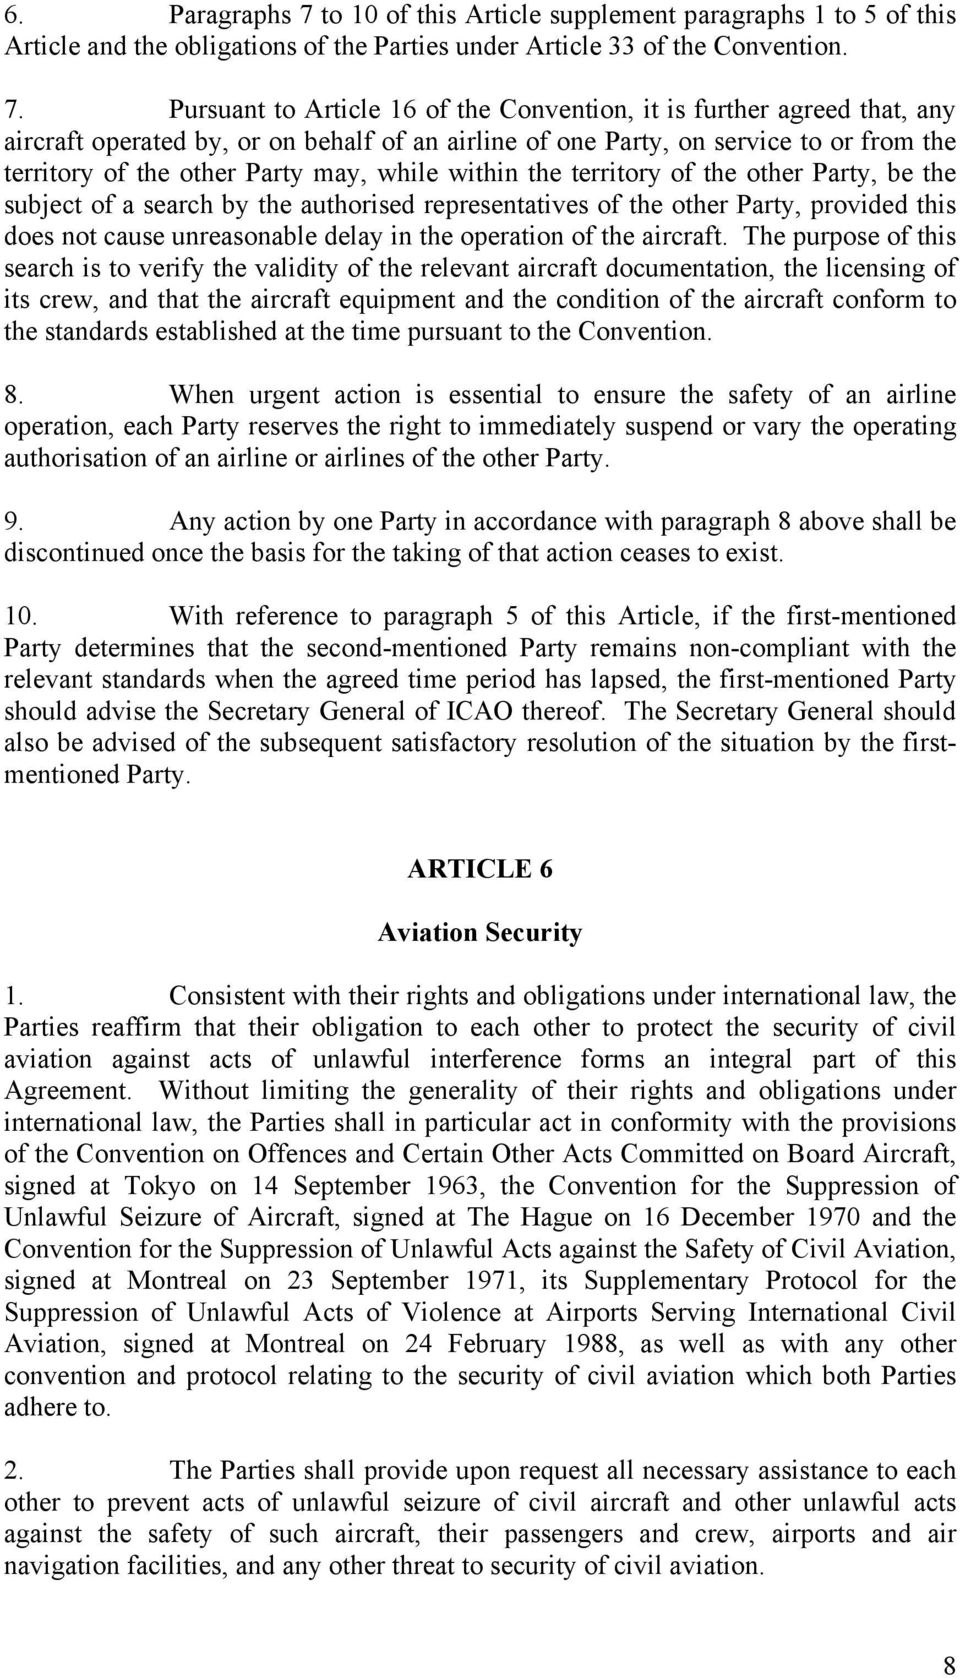 Pursuant to Article 16 of the Convention, it is further agreed that, any aircraft operated by, or on behalf of an airline of one Party, on service to or from the territory of the other Party may,